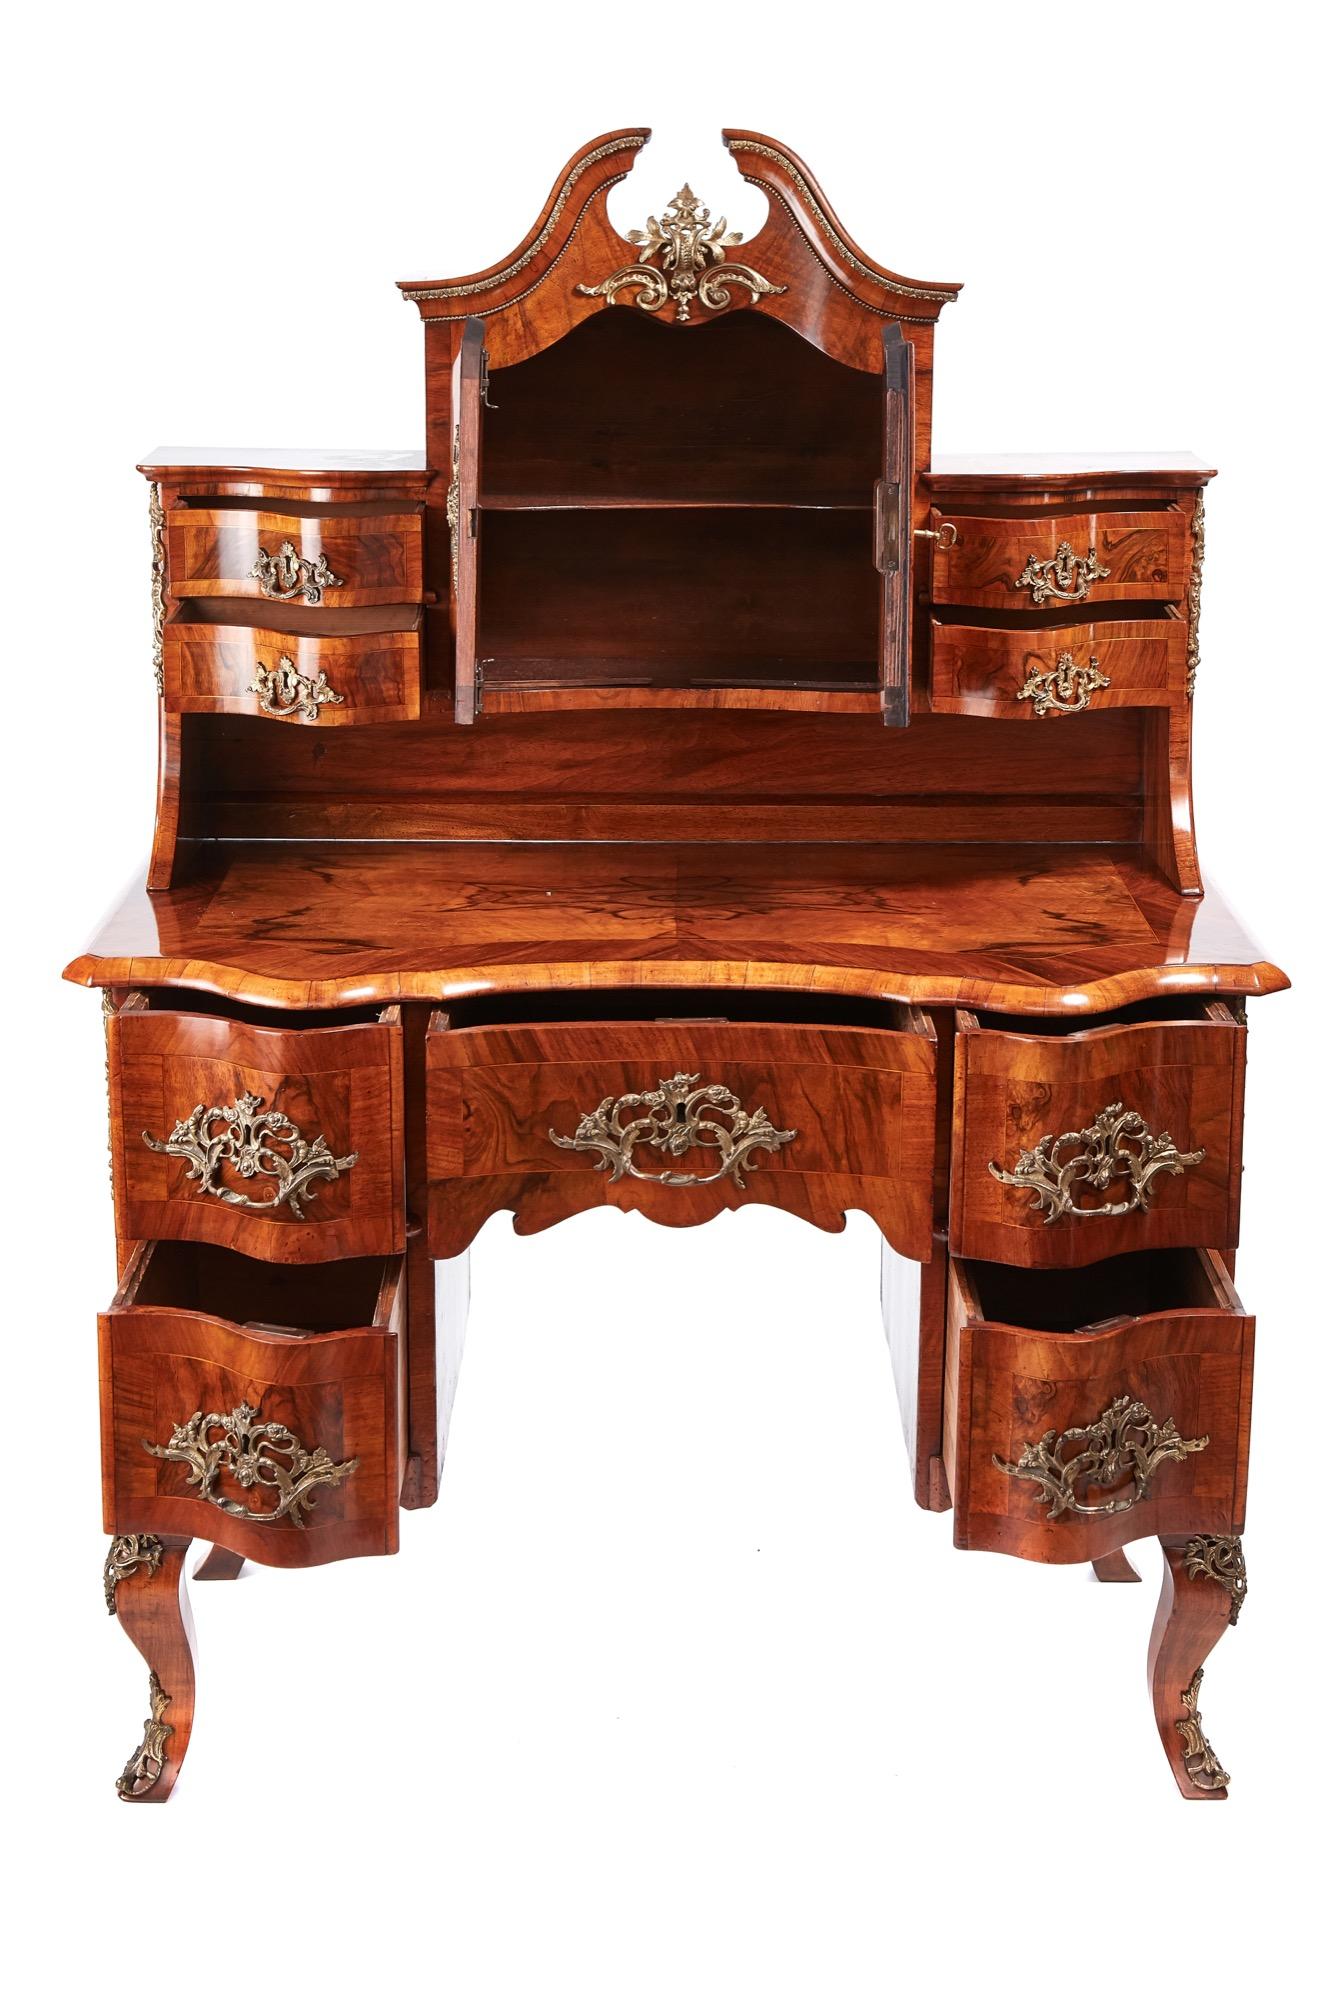 Outstanding quality Victorian French burr walnut desk, top section having a swan-neck pediment, two serpentine shaped doors and four serpentine shaped drawers in fantastic quality burr walnut with original rococco gilt brass handles and mounts, the